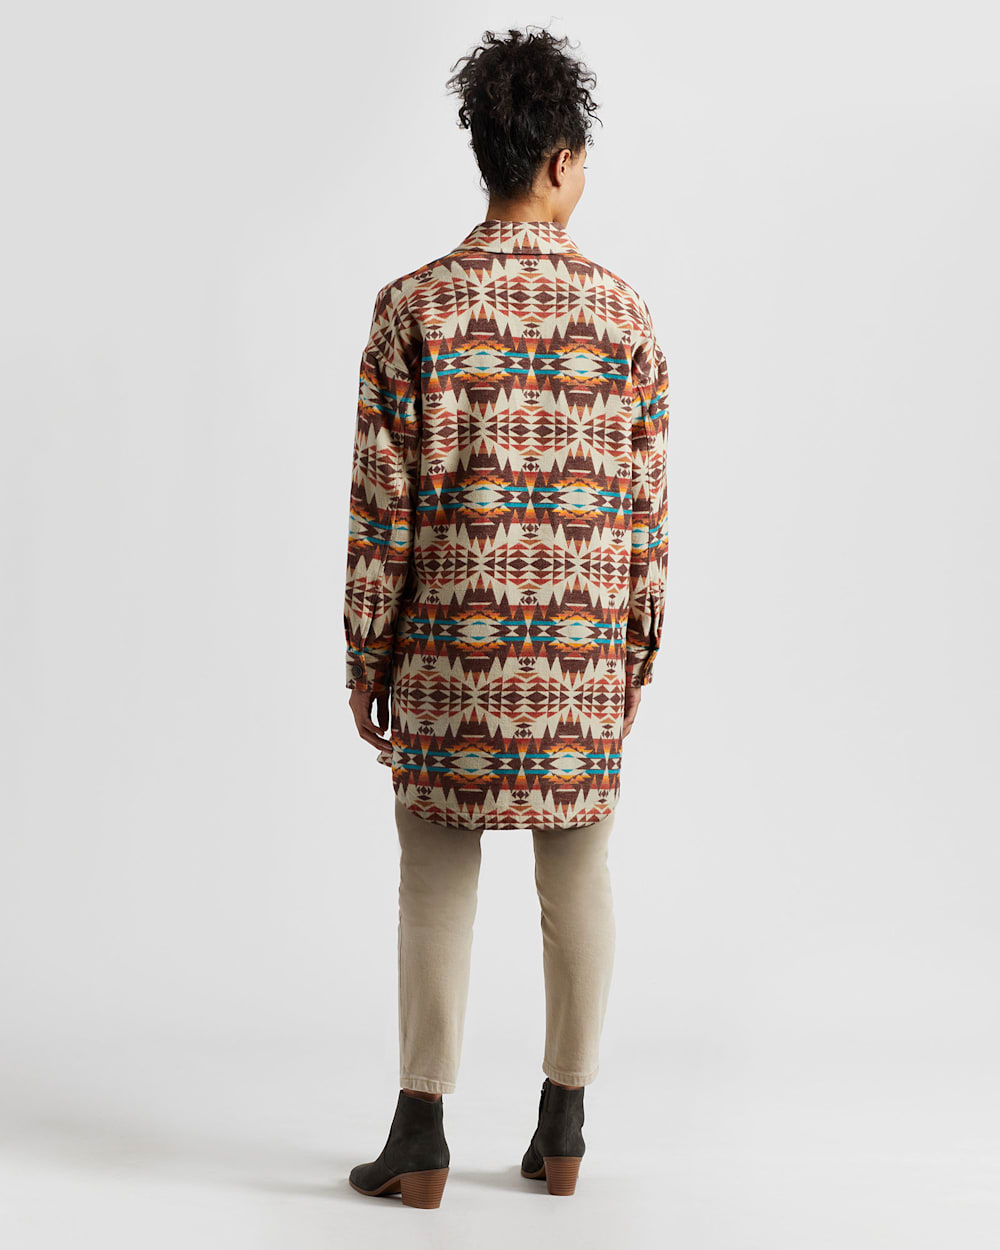 ALTERNATE VIEW OF WOMEN'S OVERSIZED DOUBLESOFT SHIRT JACKET IN WARM SAND MULTI image number 3